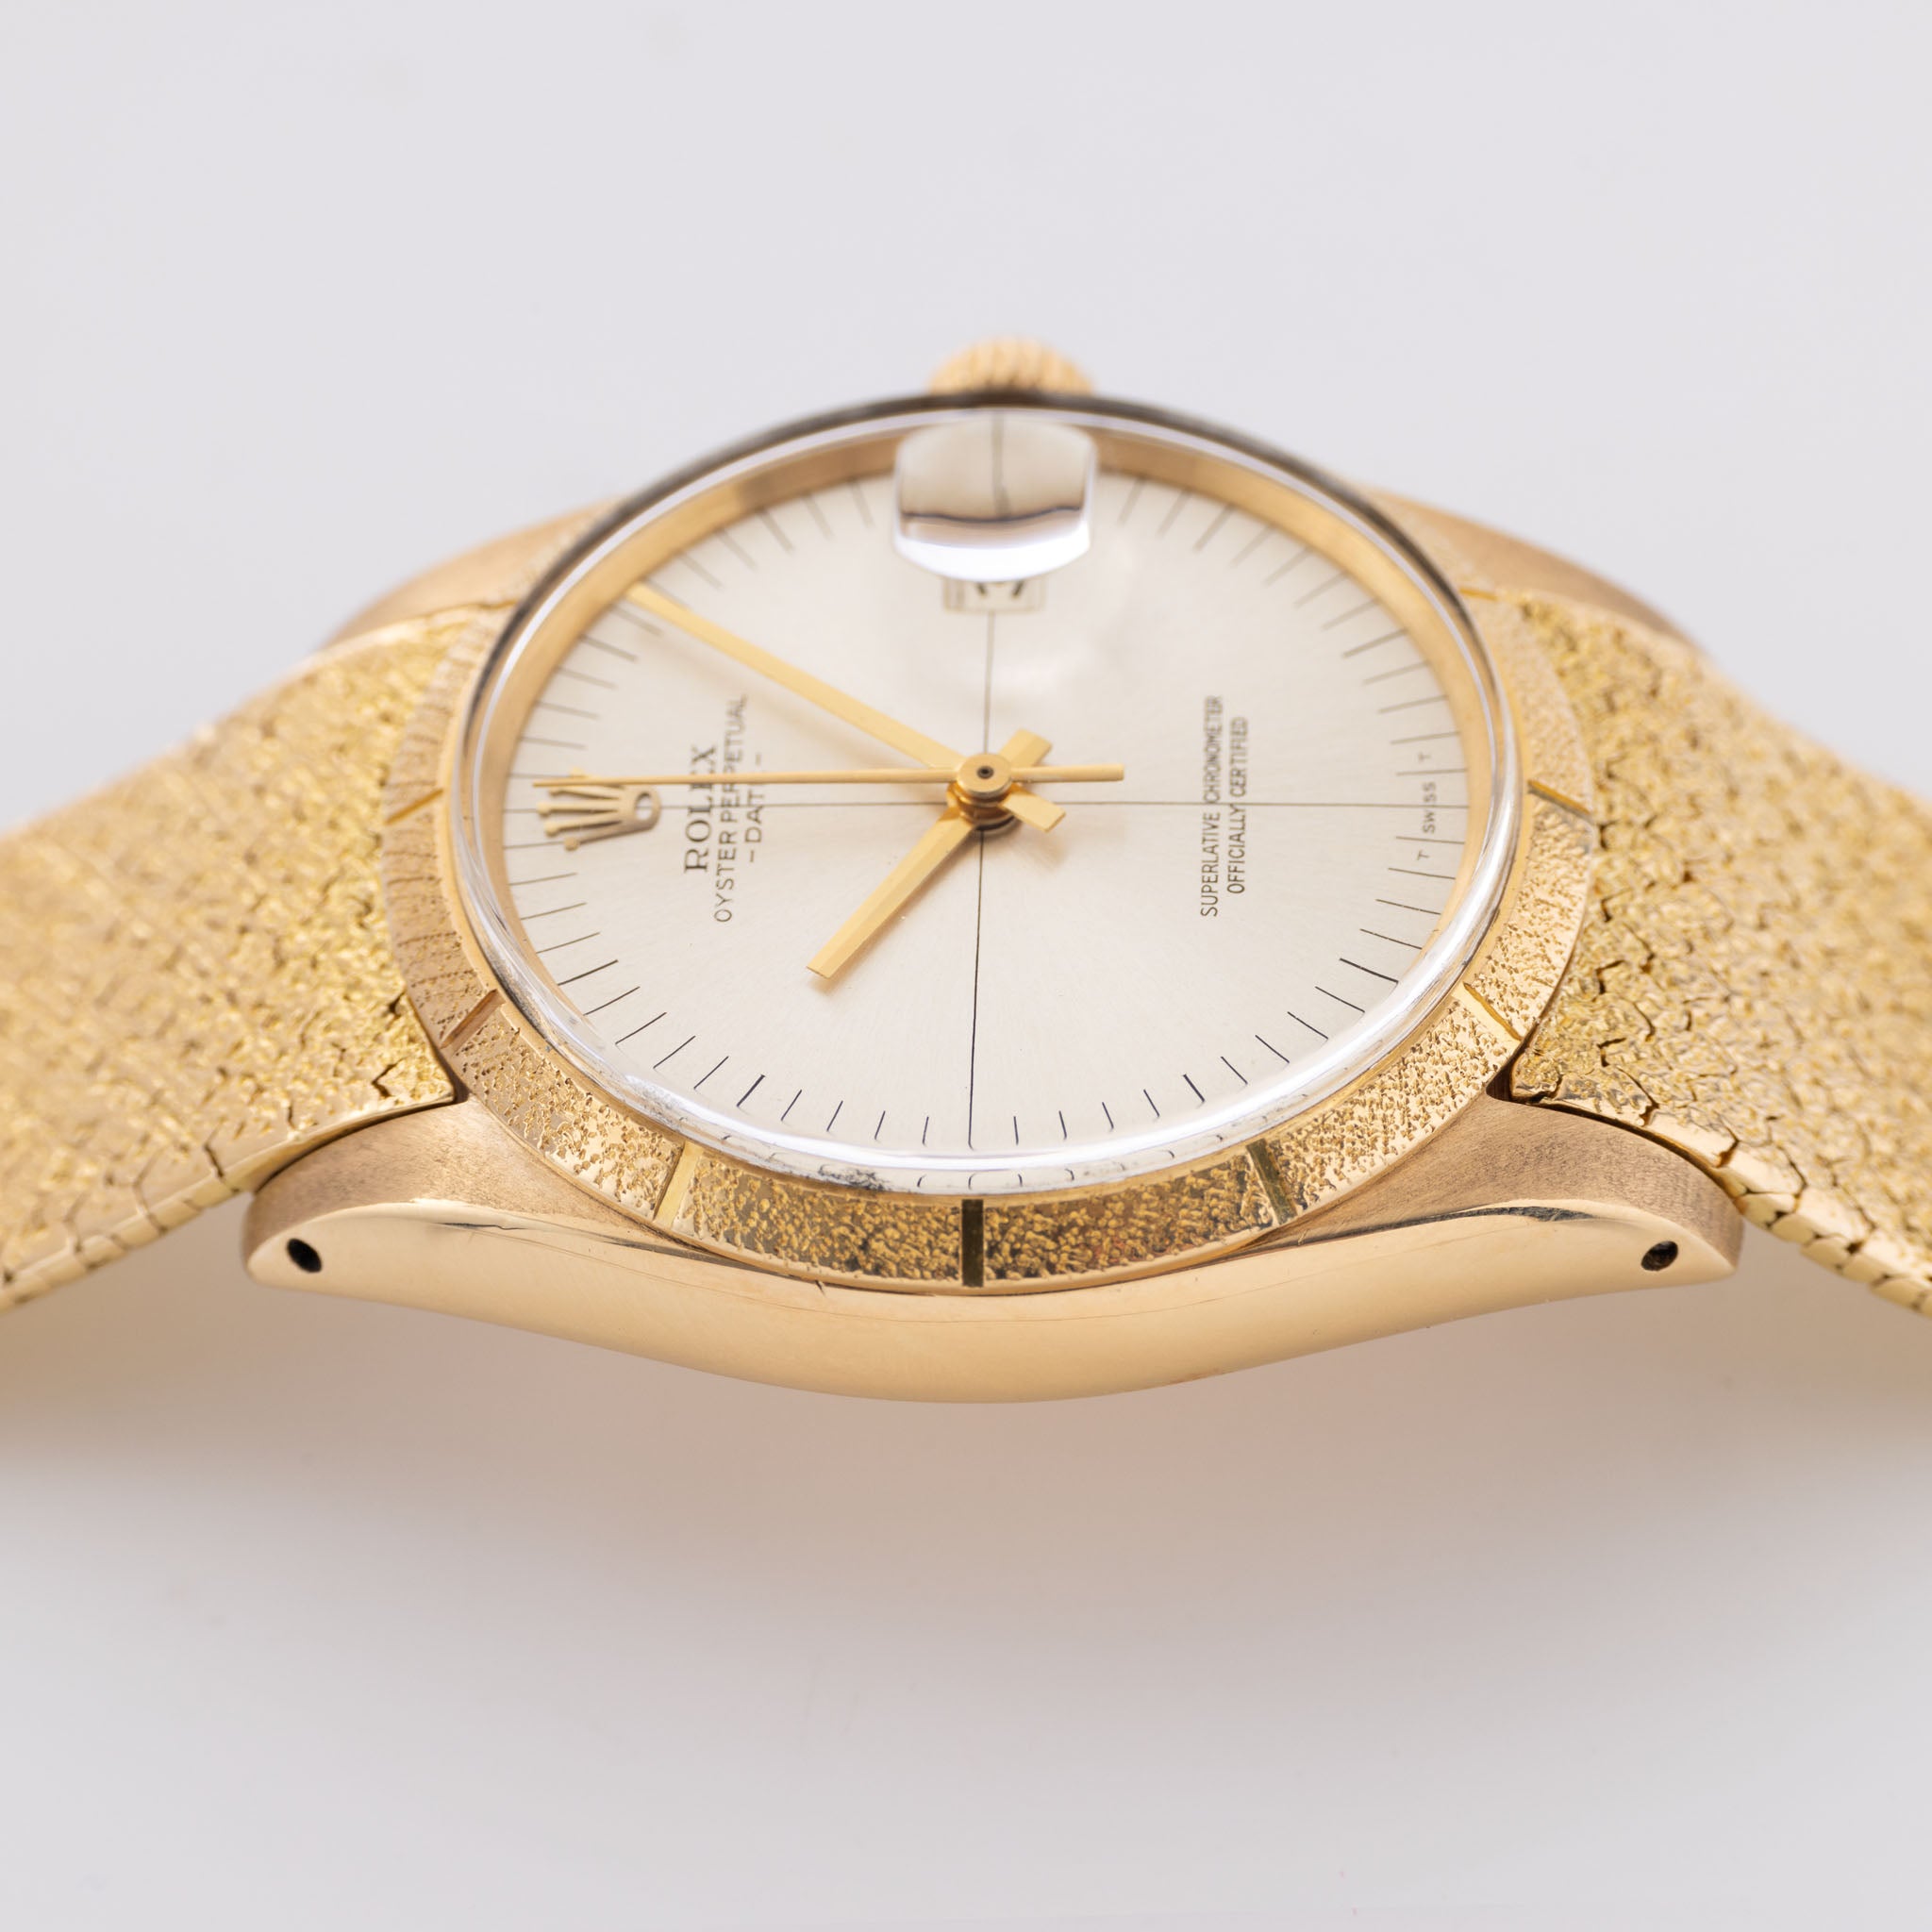 Rolex Zephyr Date Yellow Gold Reference 1510